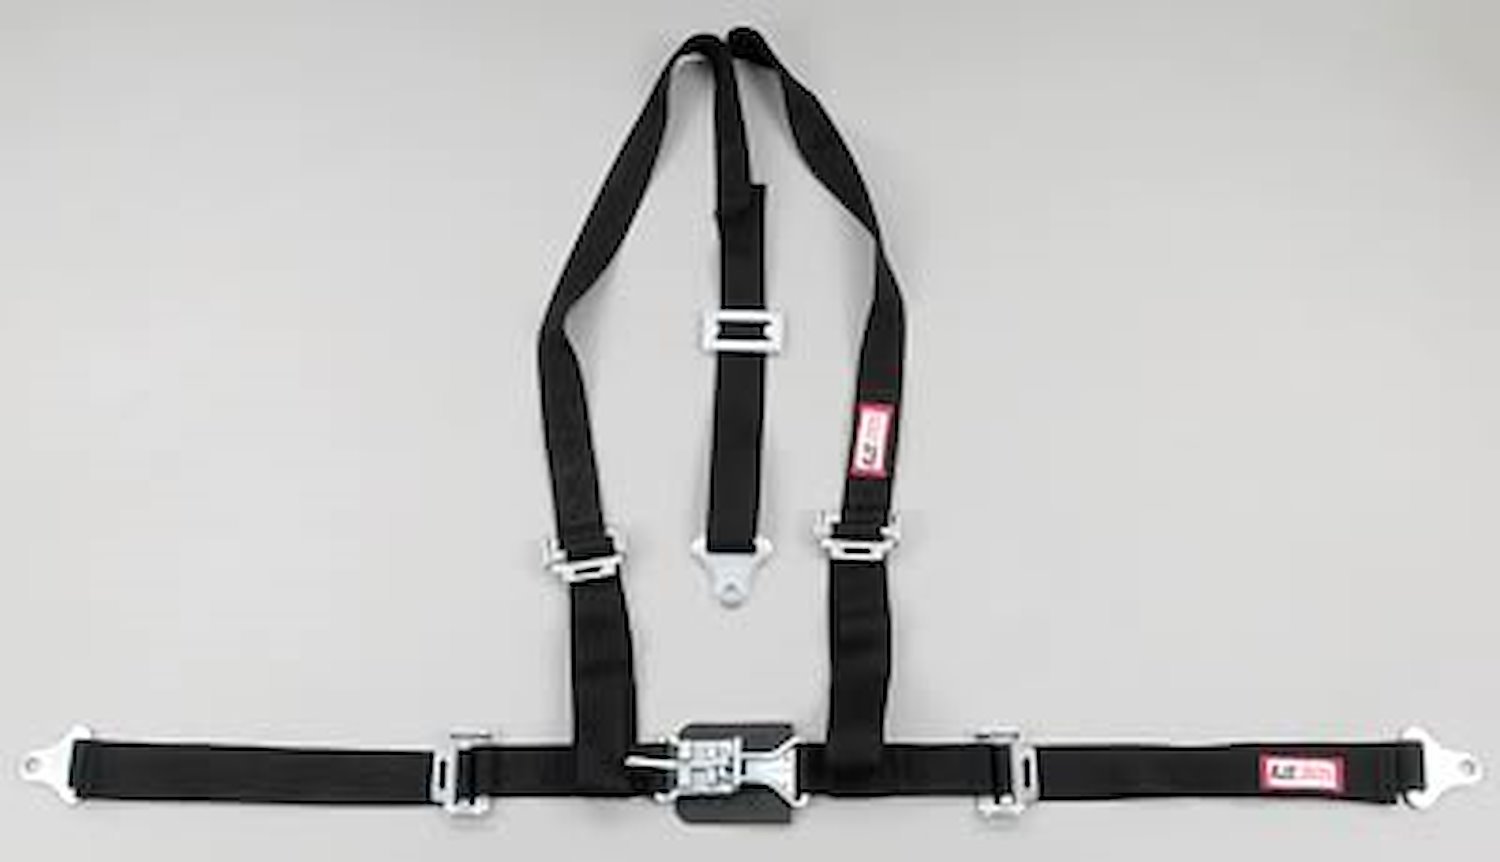 NON-SFI L&L HARNESS 2 PULL DOWN Lap Belt SNAP SEWN IN 2 S.H. Y FLOOR Mount w/STERNUM STRAP WRAP/SNAP BLACK